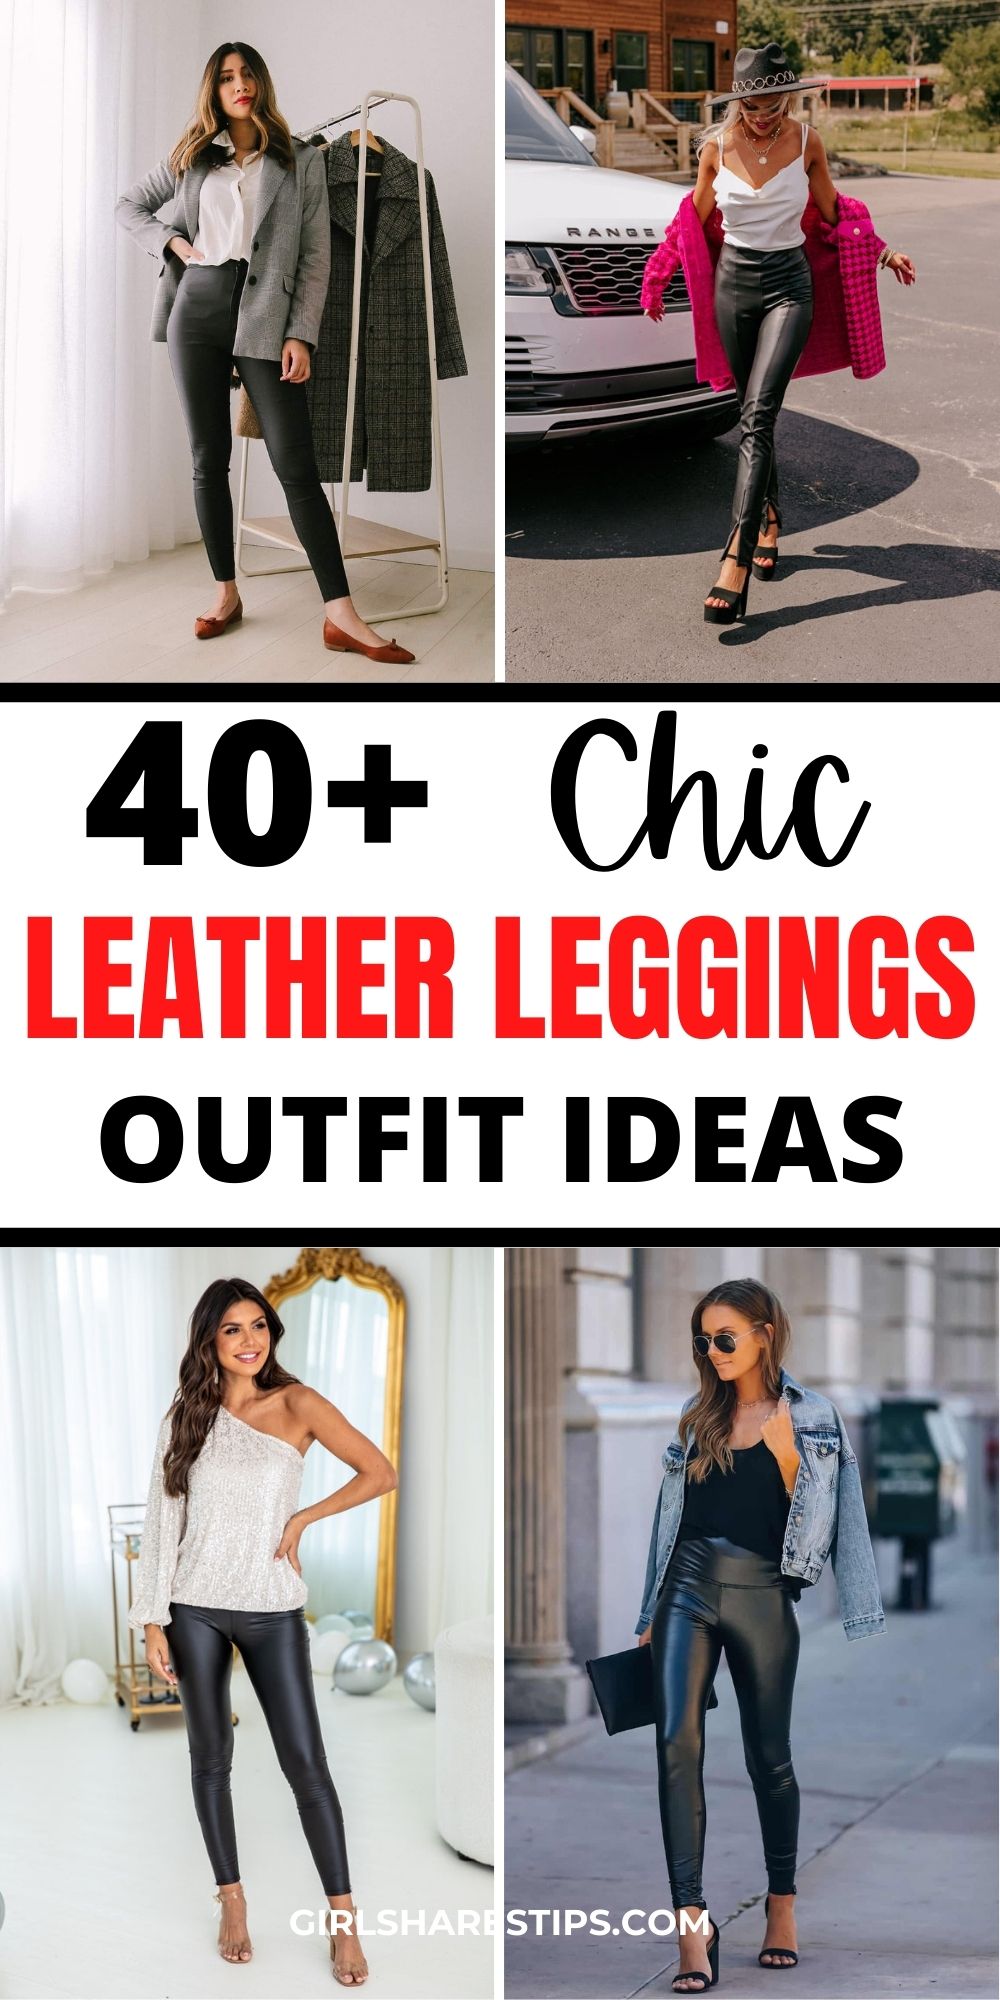 chic leather leggings outfit ideas